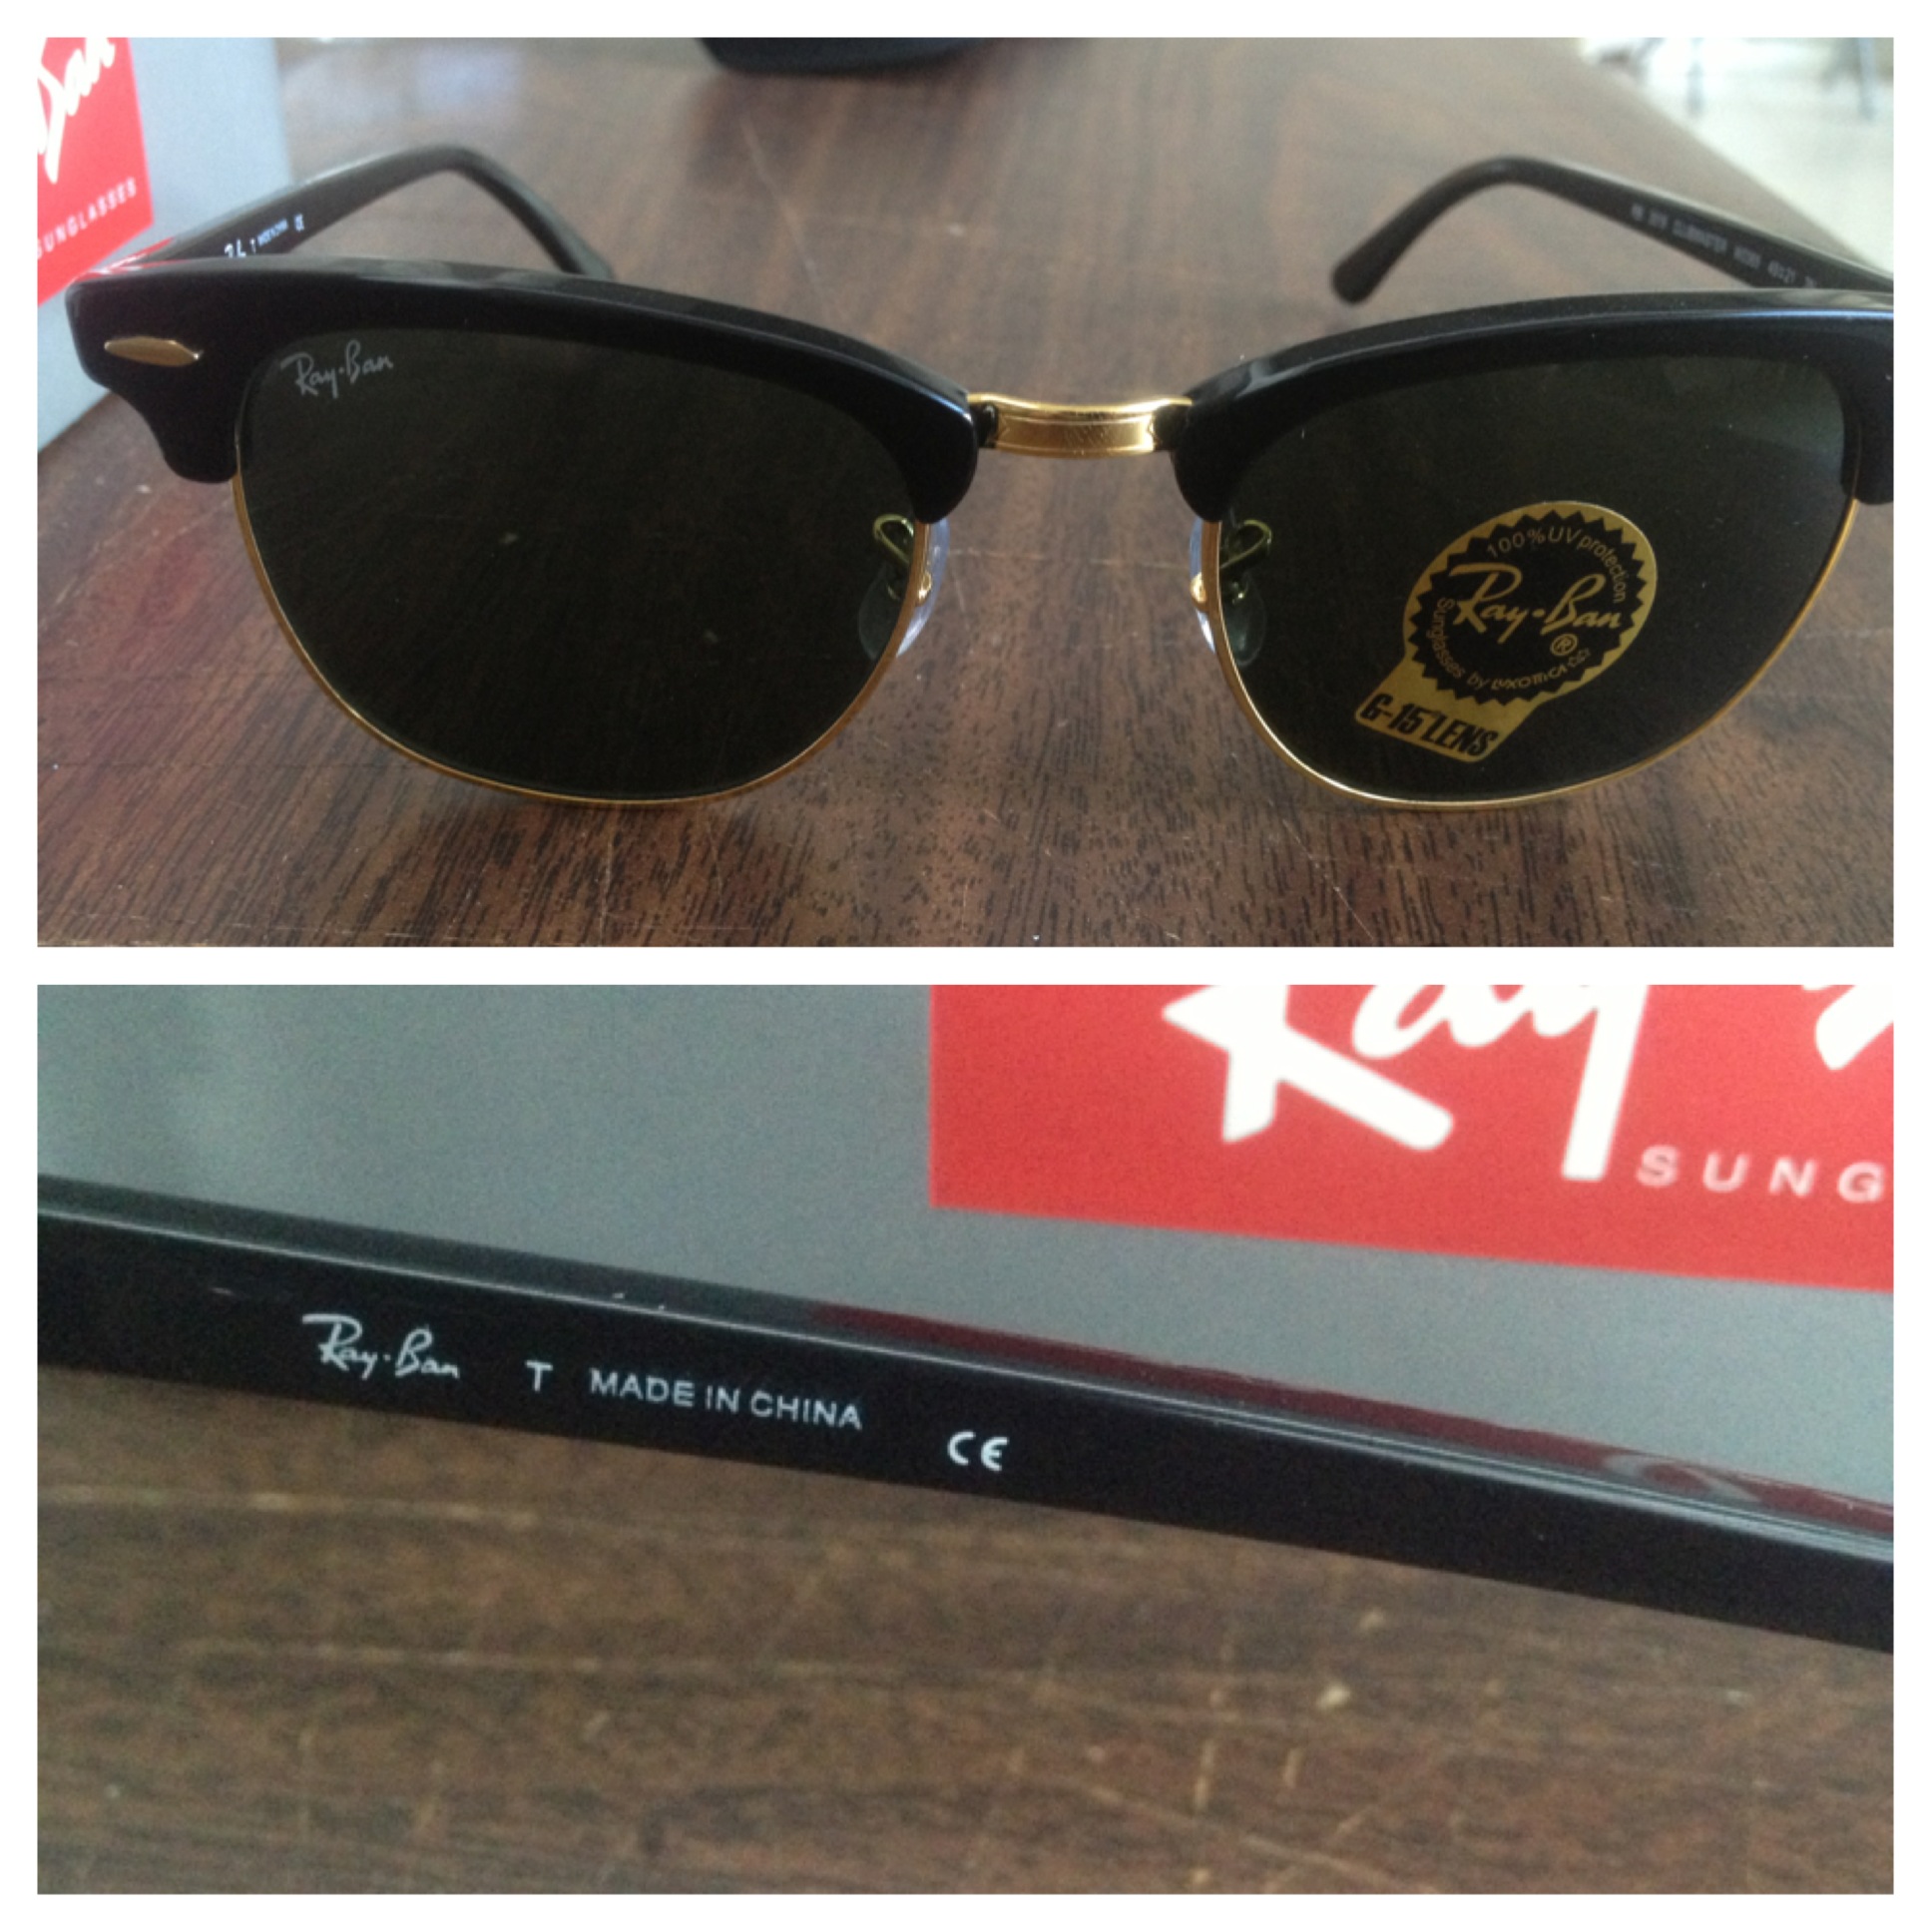 ray-ban clubmasters made in china